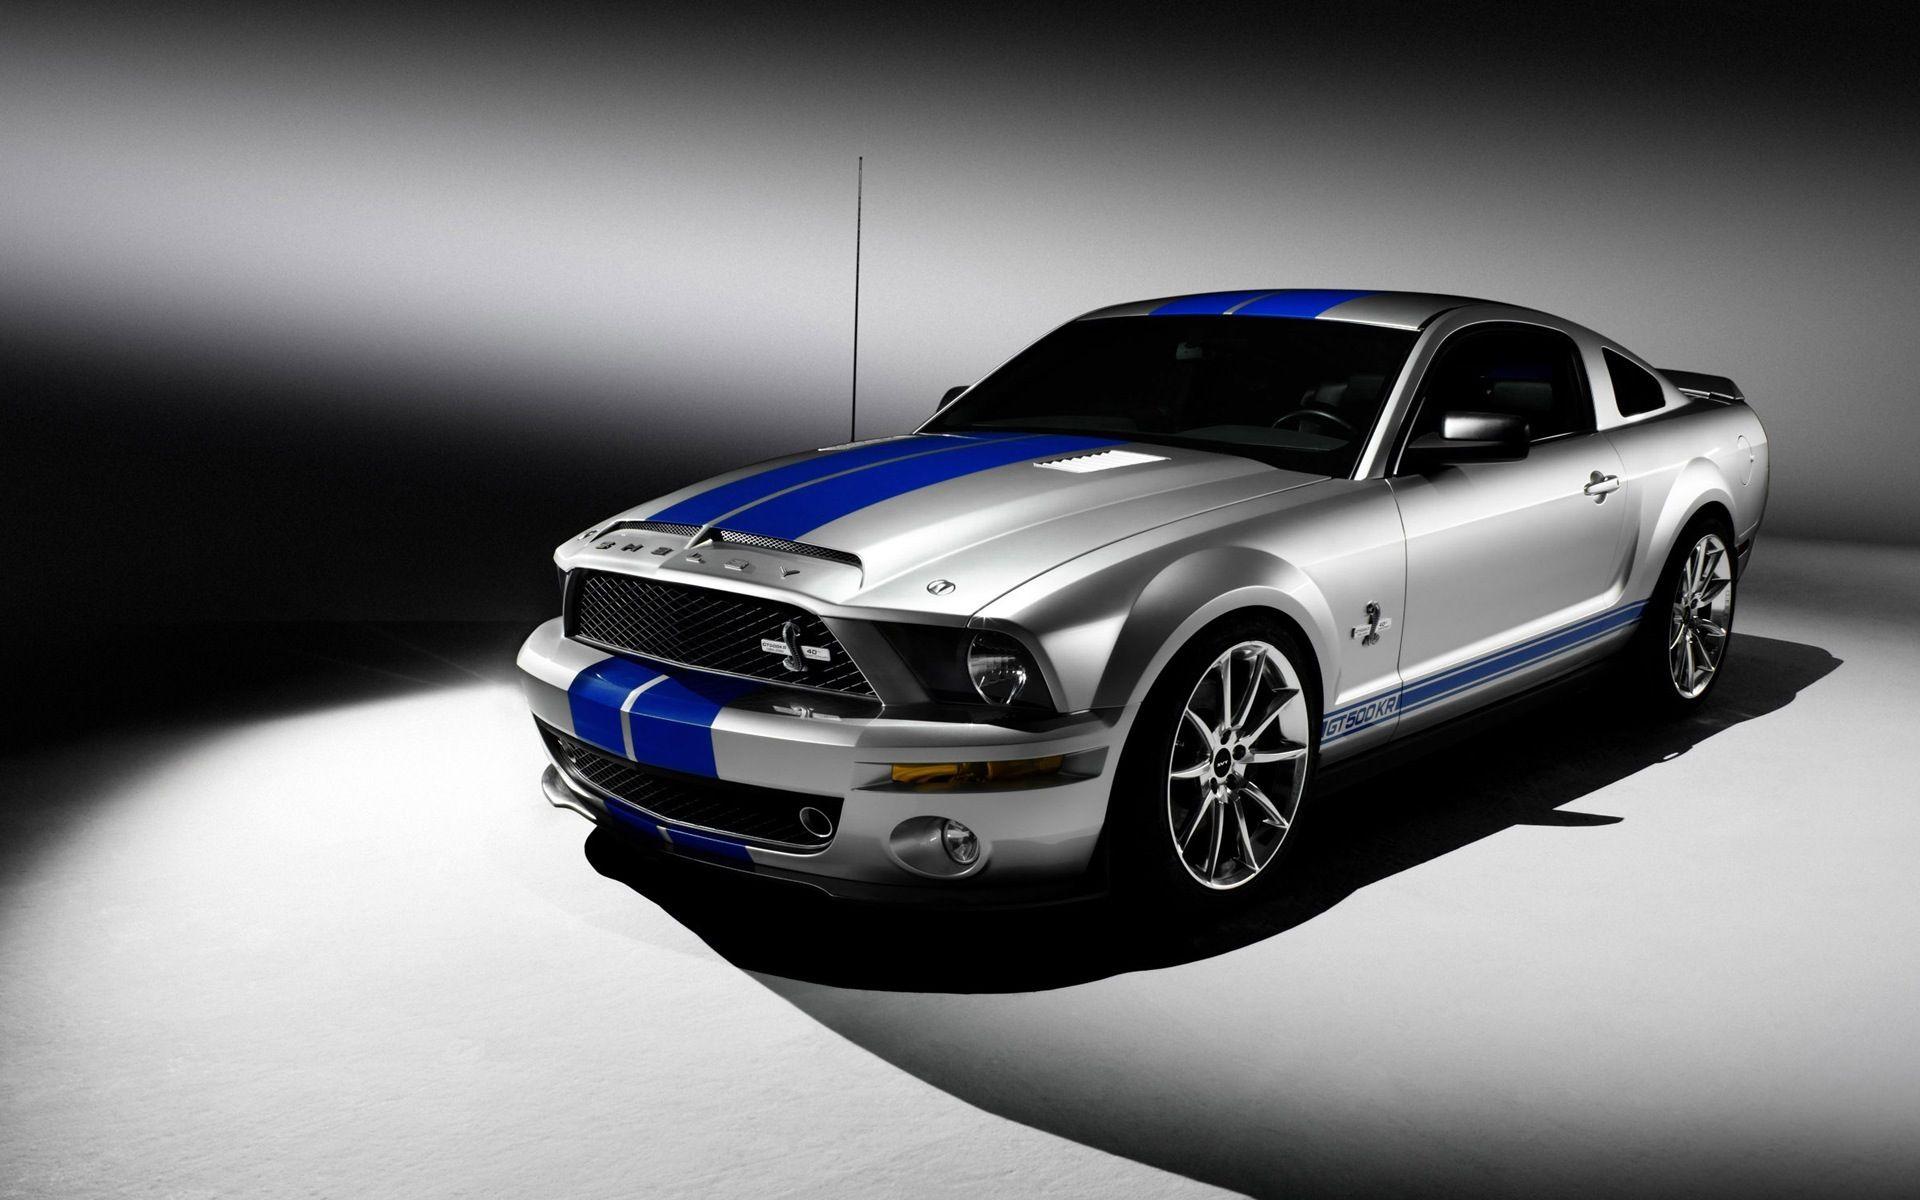 Mustang Shelby Hd Wallpaper Download